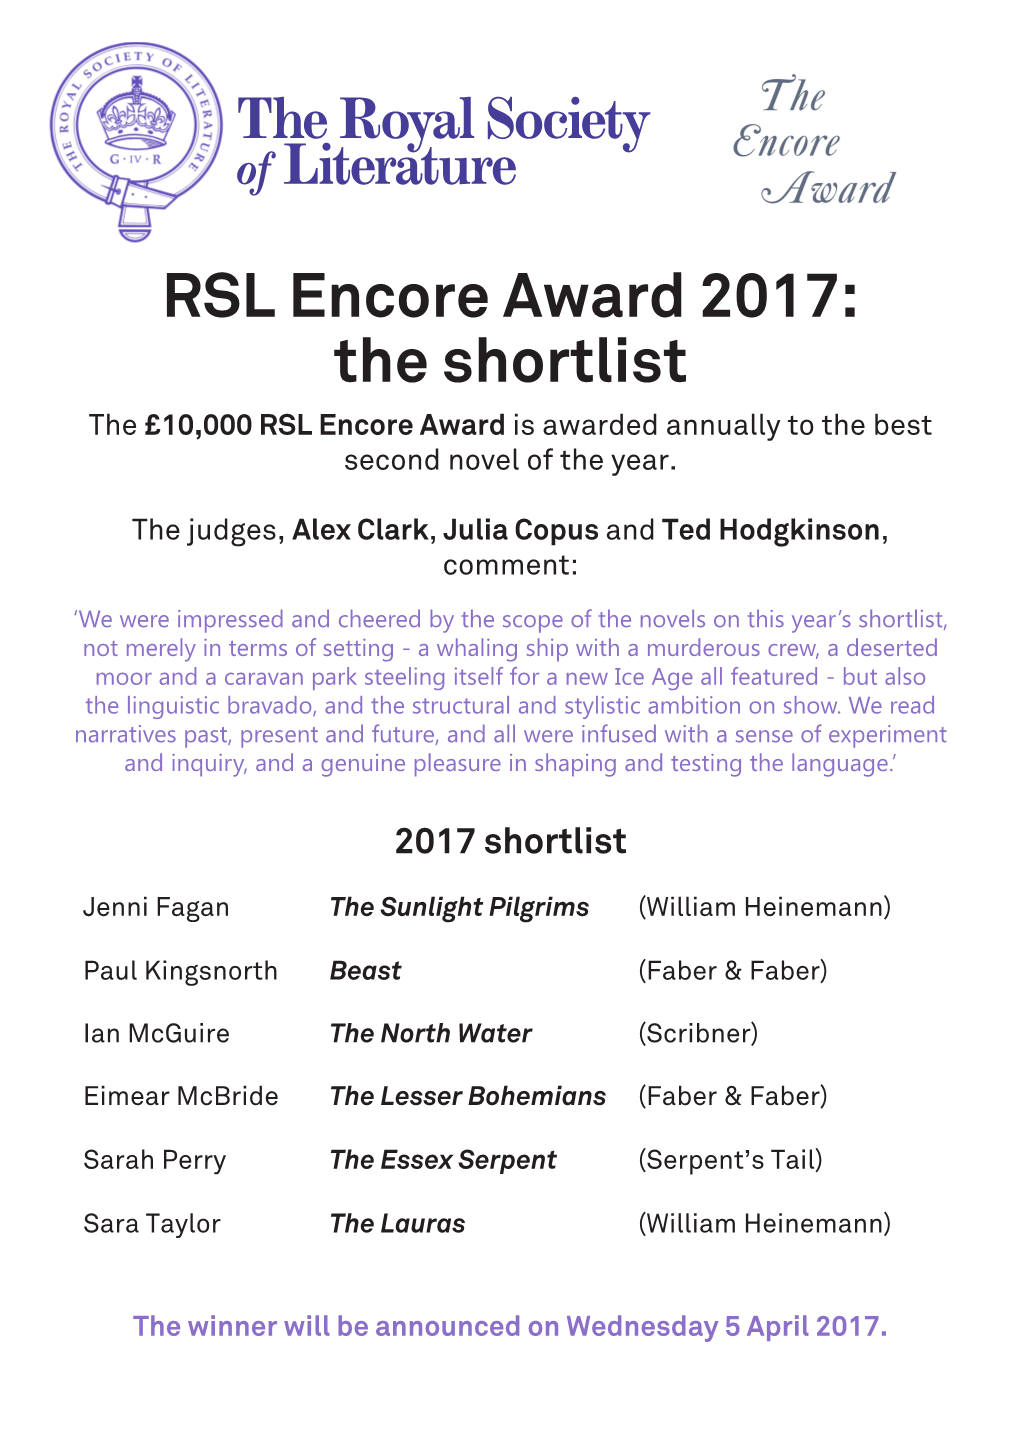 RSL Encore Award 2017: the Shortlist the £10,000 RSL Encore Award Is Awarded Annually to the Best Second Novel of the Year